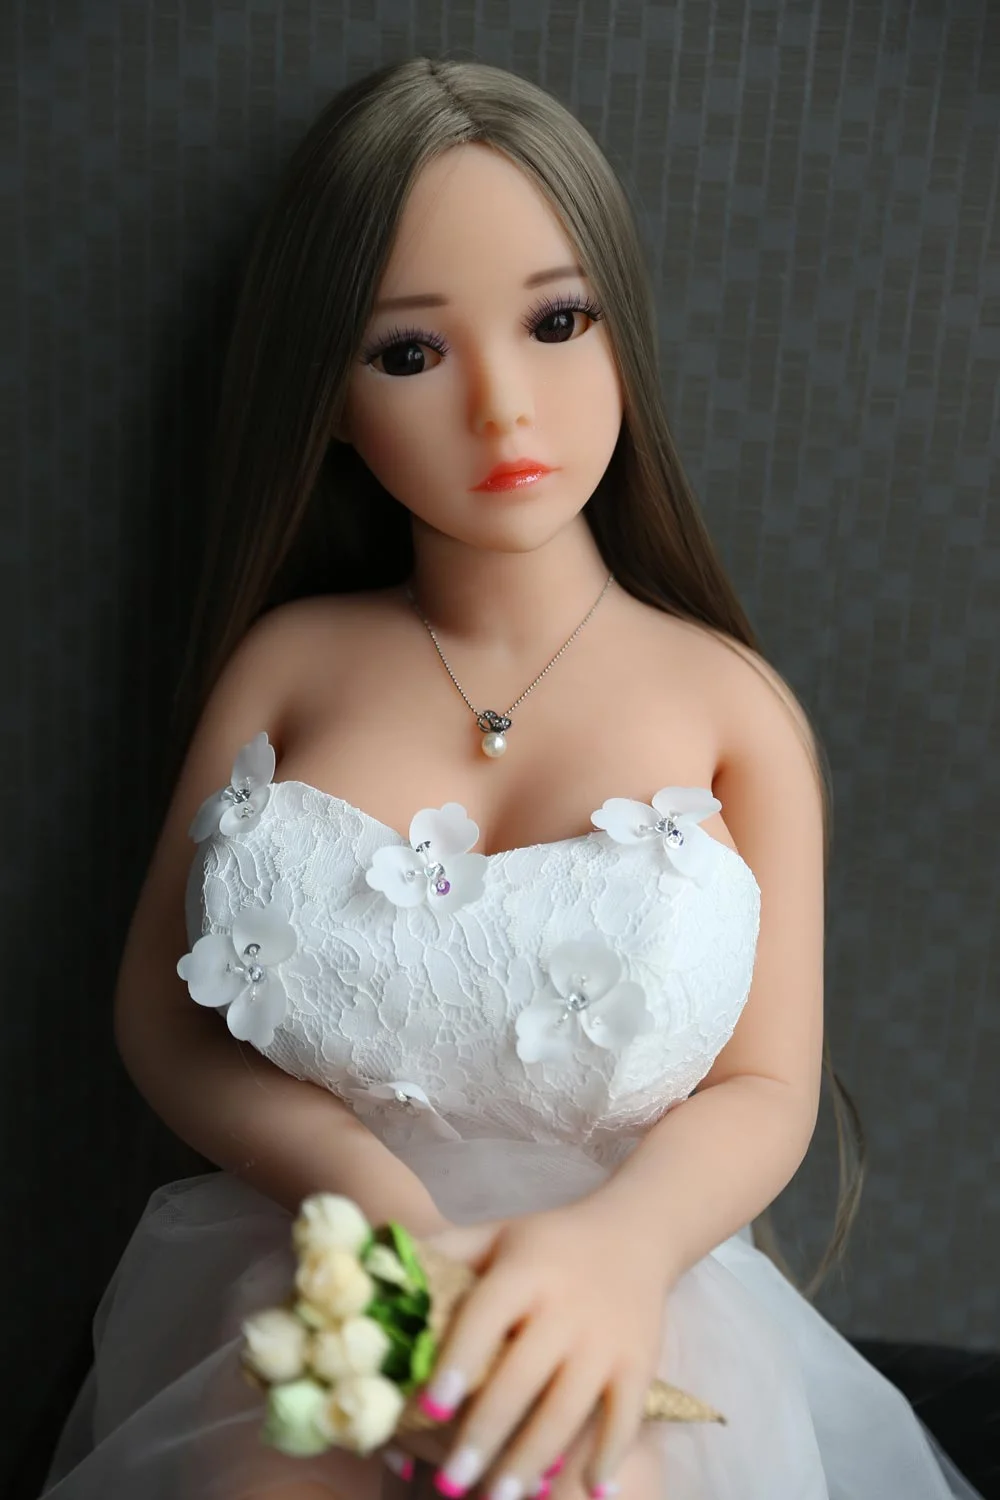 Mini sex doll with flowers in both hands